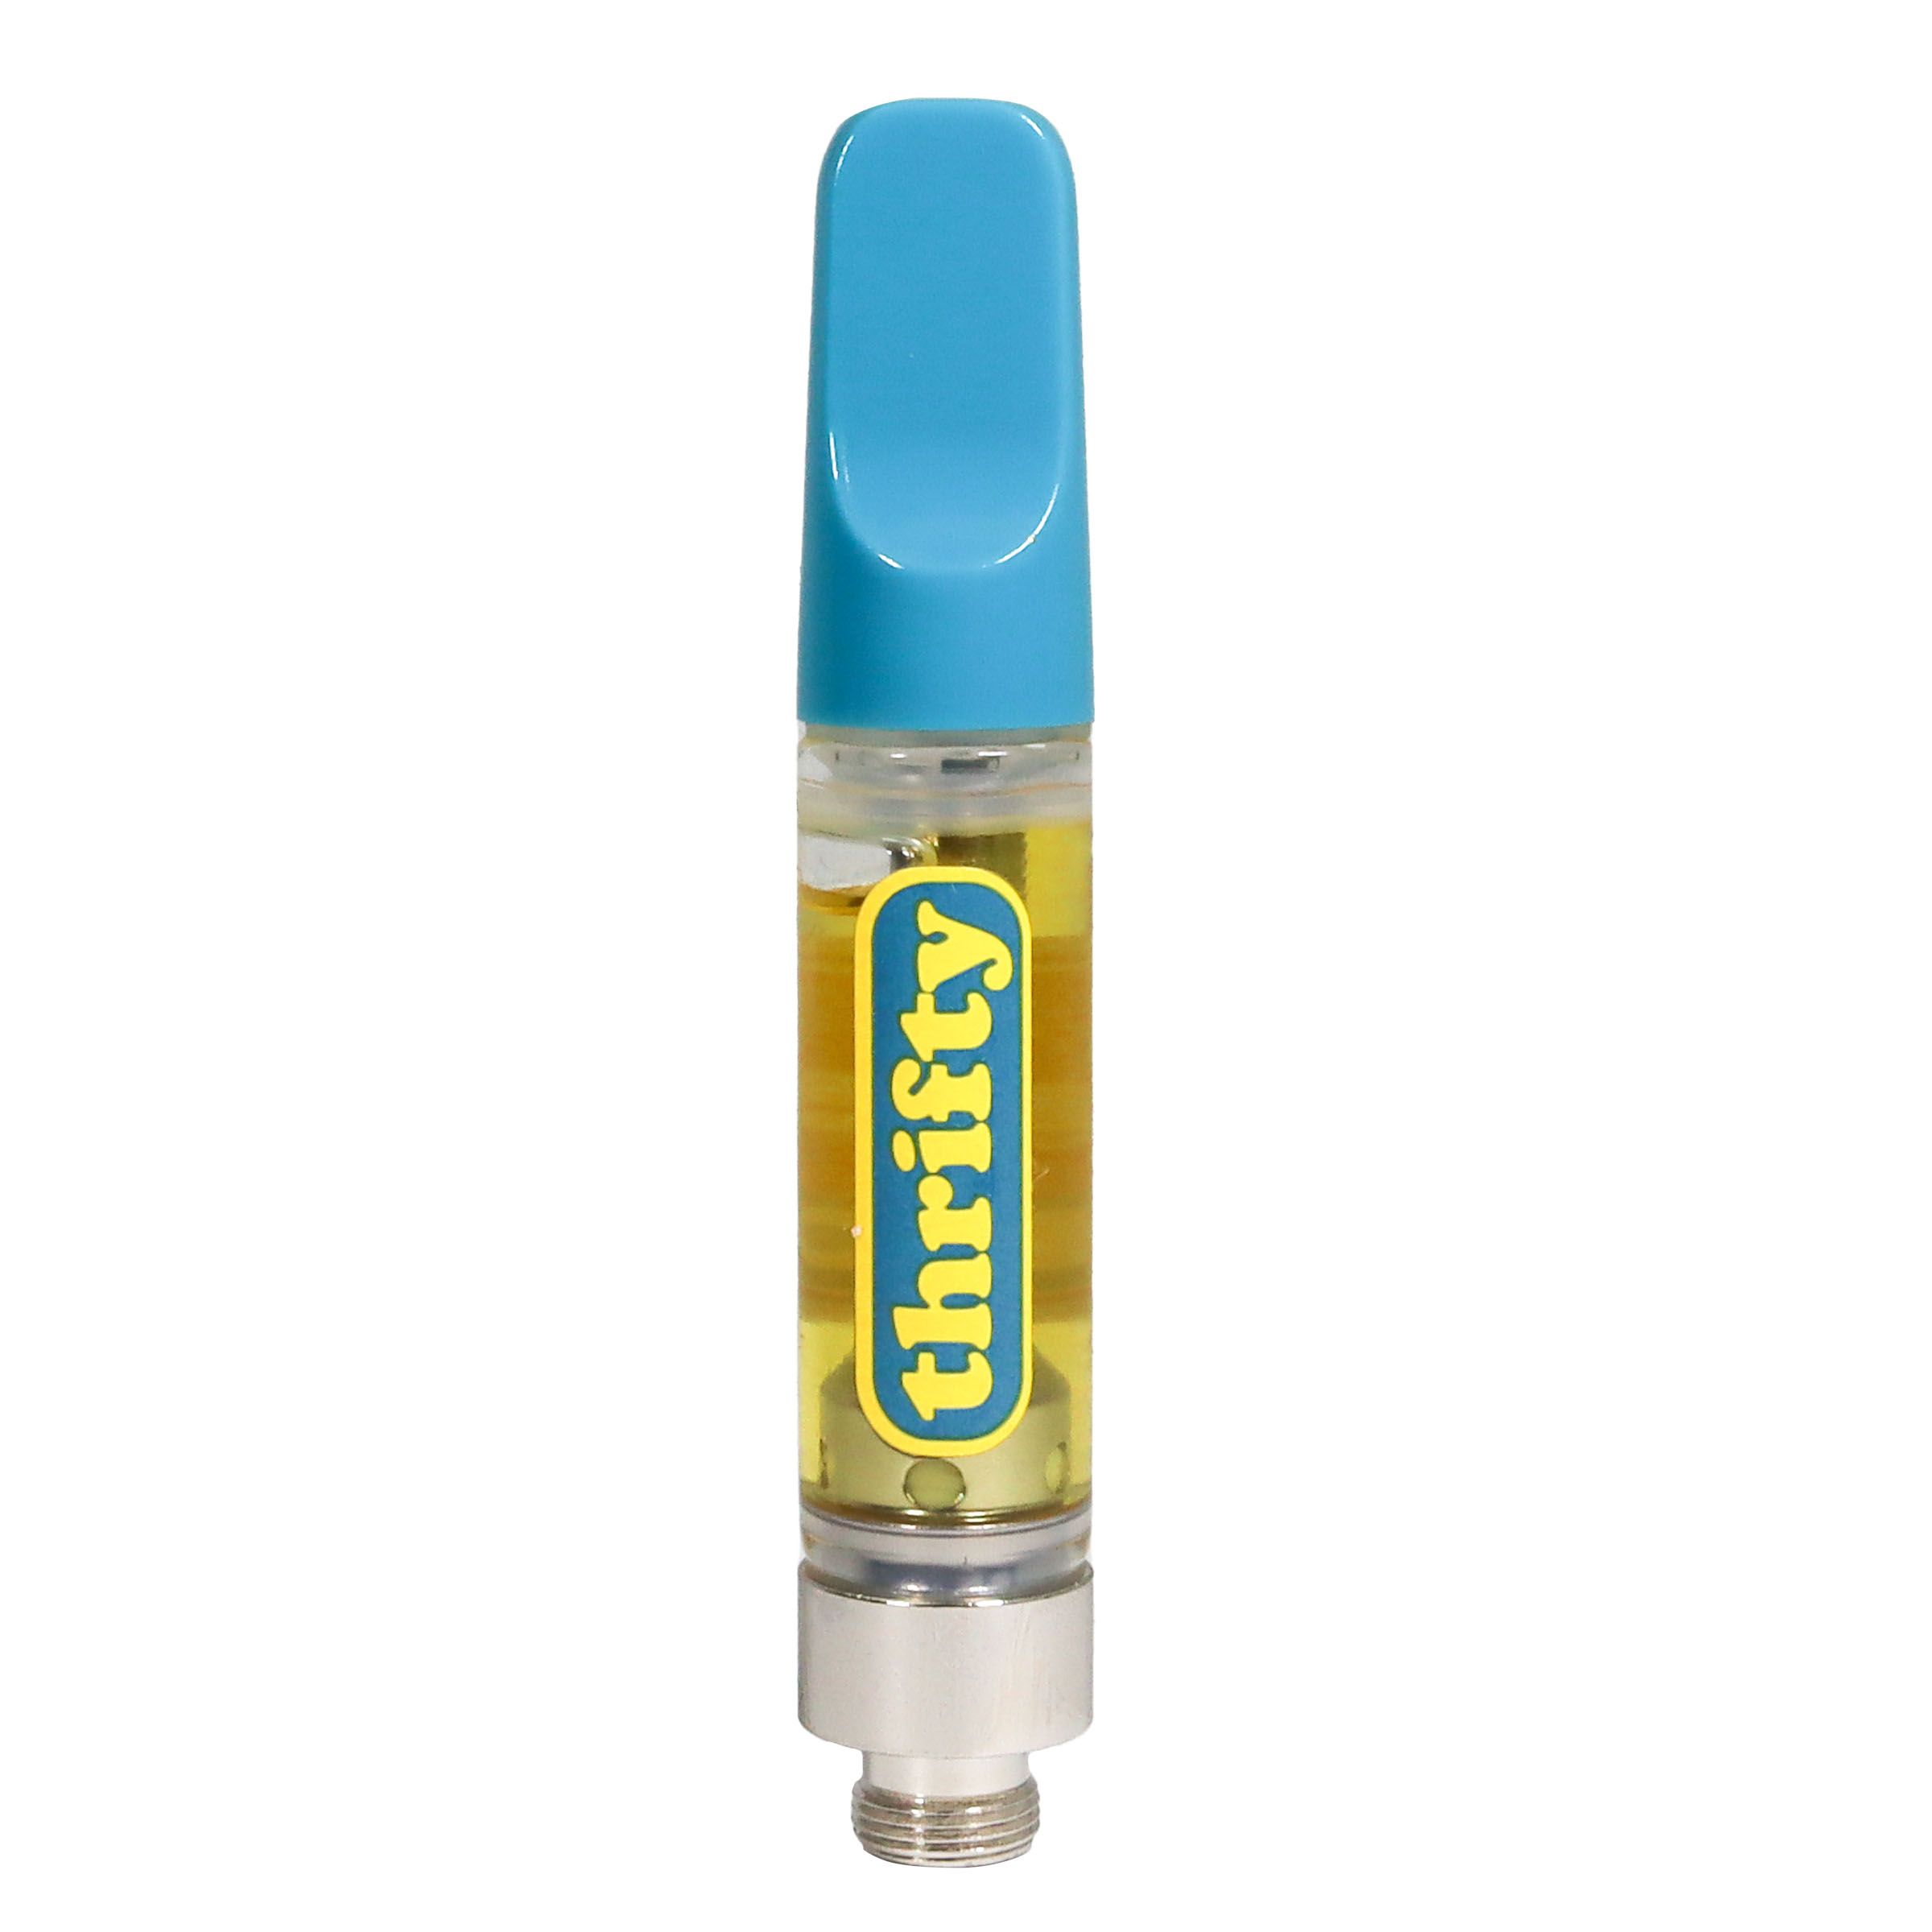 Cannabis Product Bubble Berry 510 Thread Cartridge by Thrifty